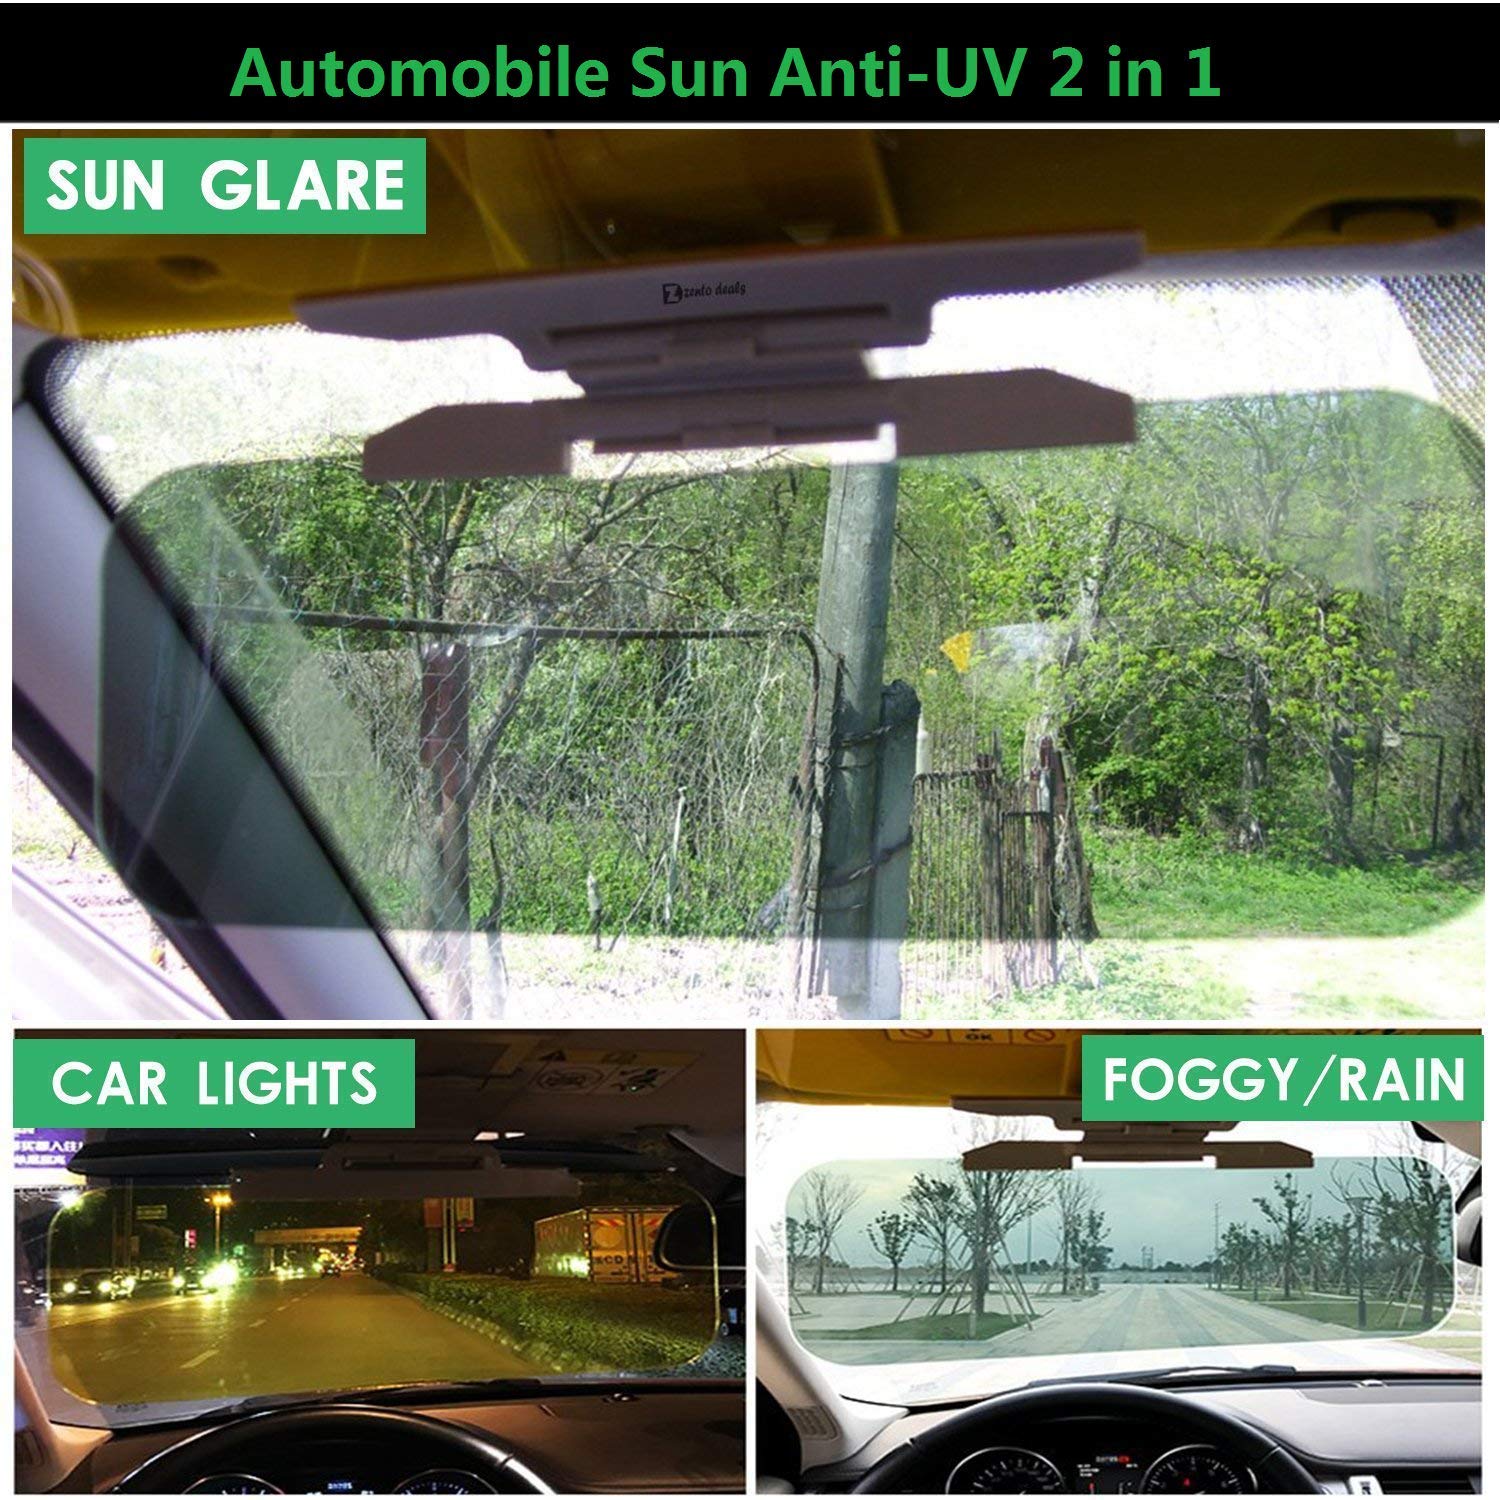 This Handy Car Sun Visor Extender Is on Sale at